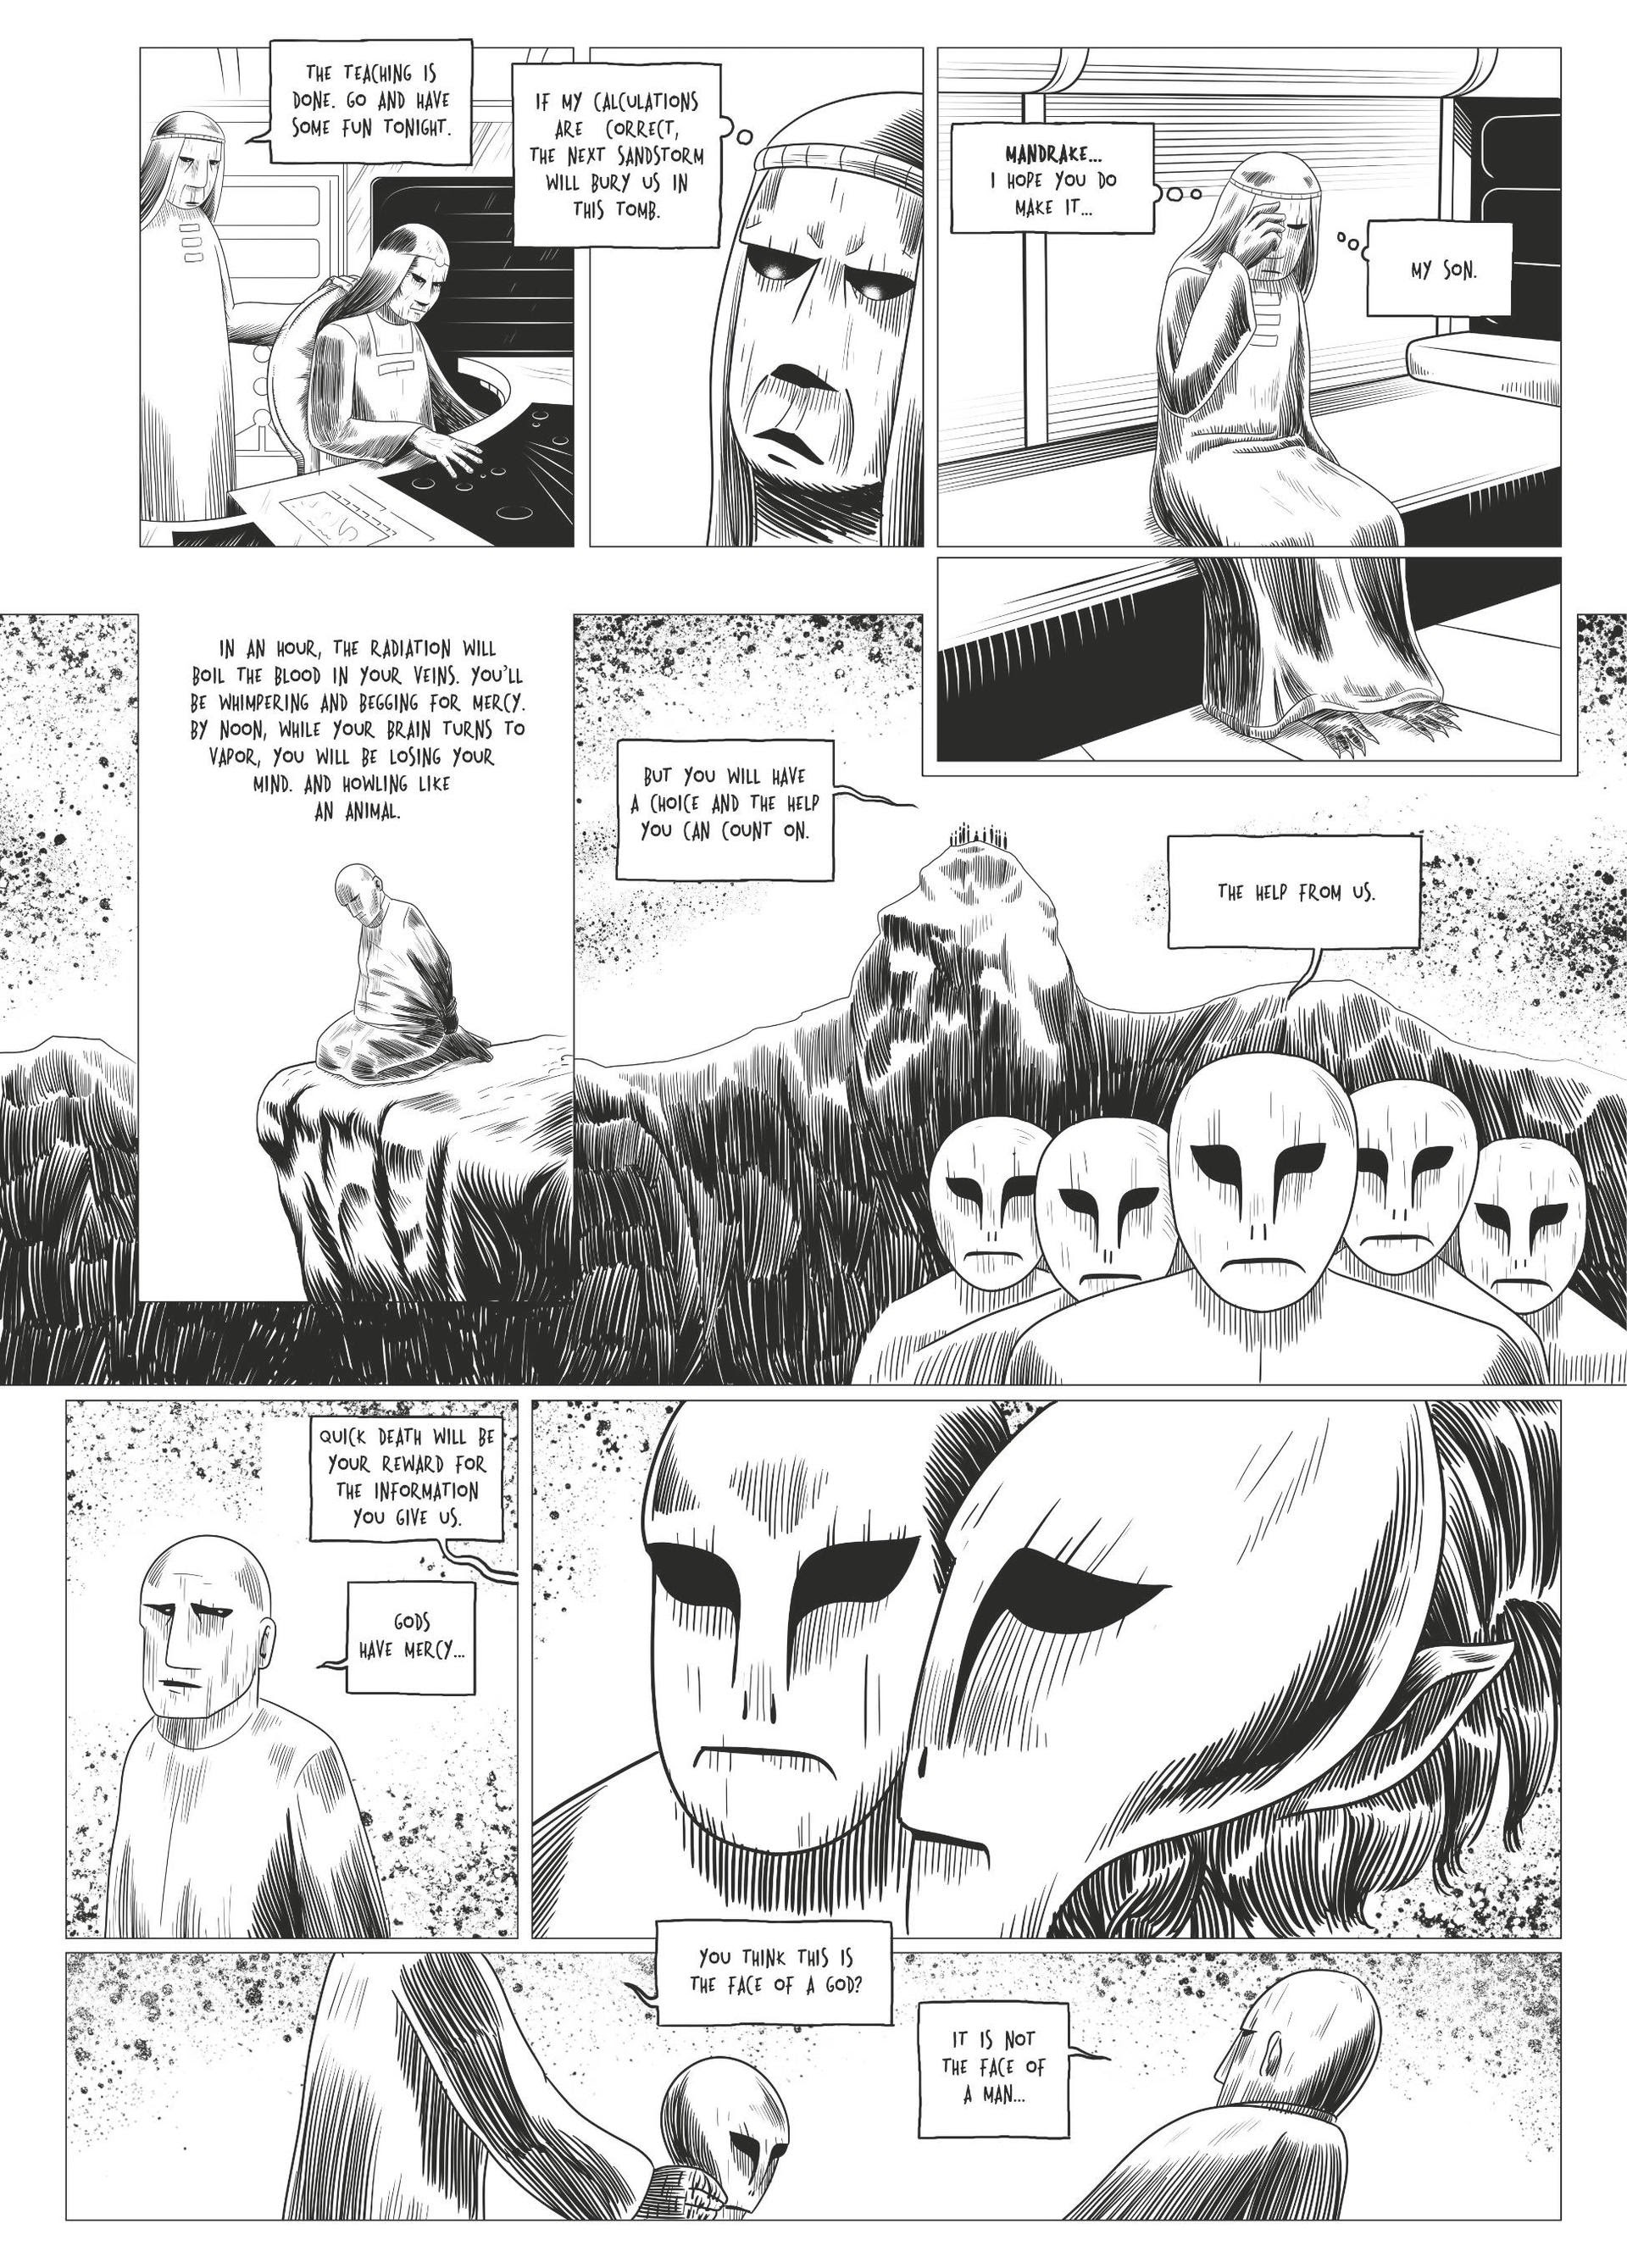 Read online Gaia comic -  Issue #4 - 7